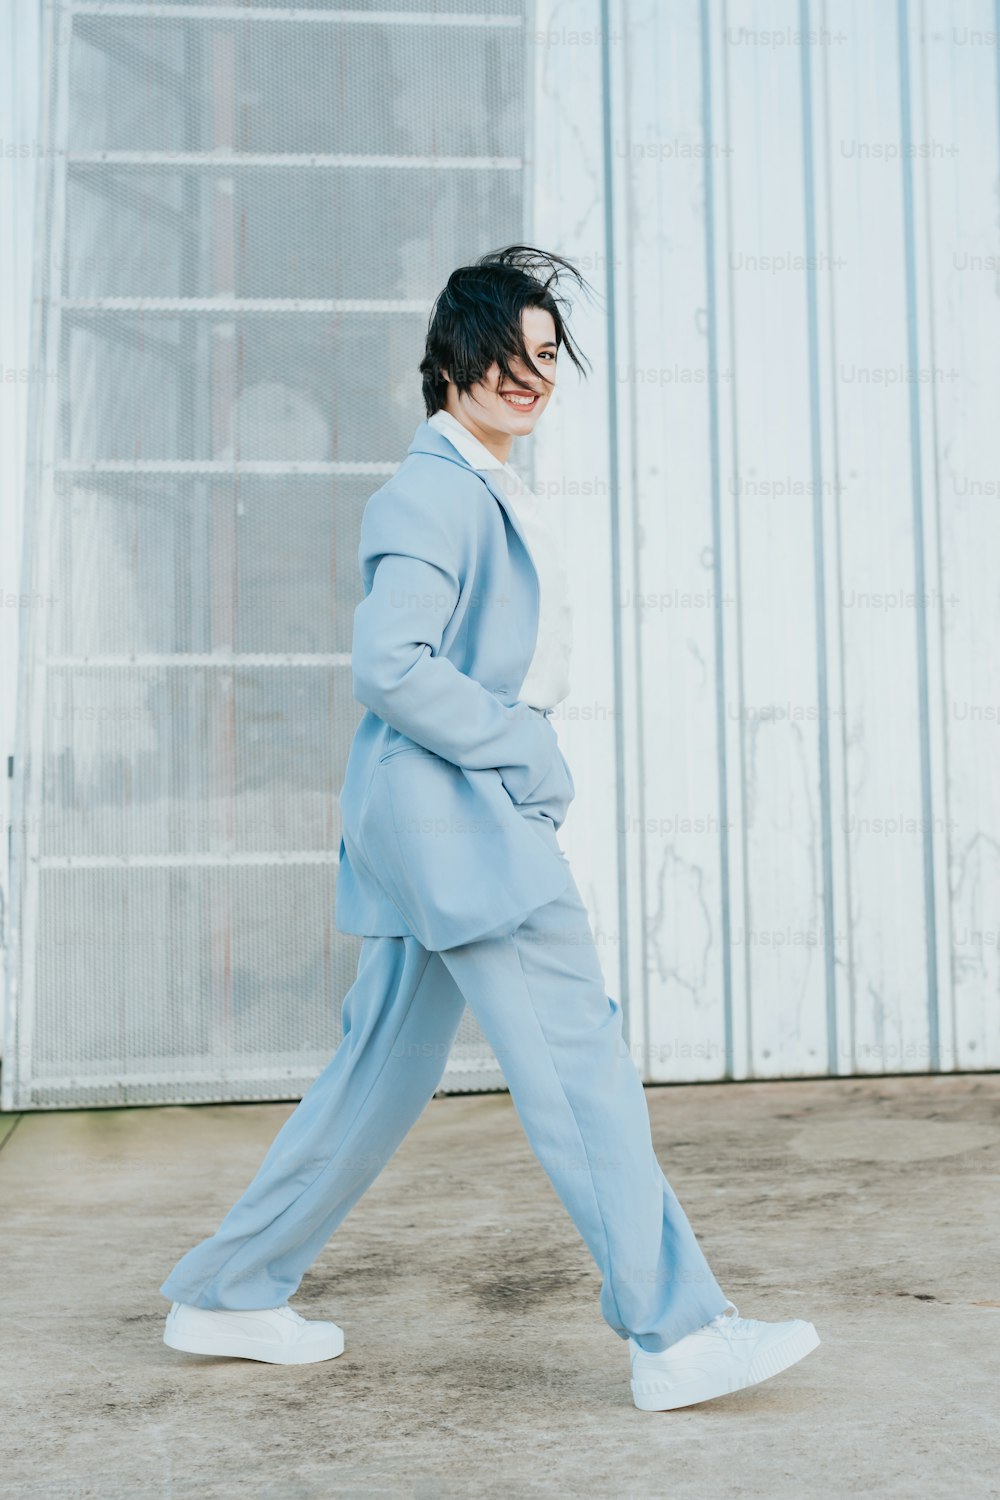 a person in a blue suit and white sneakers